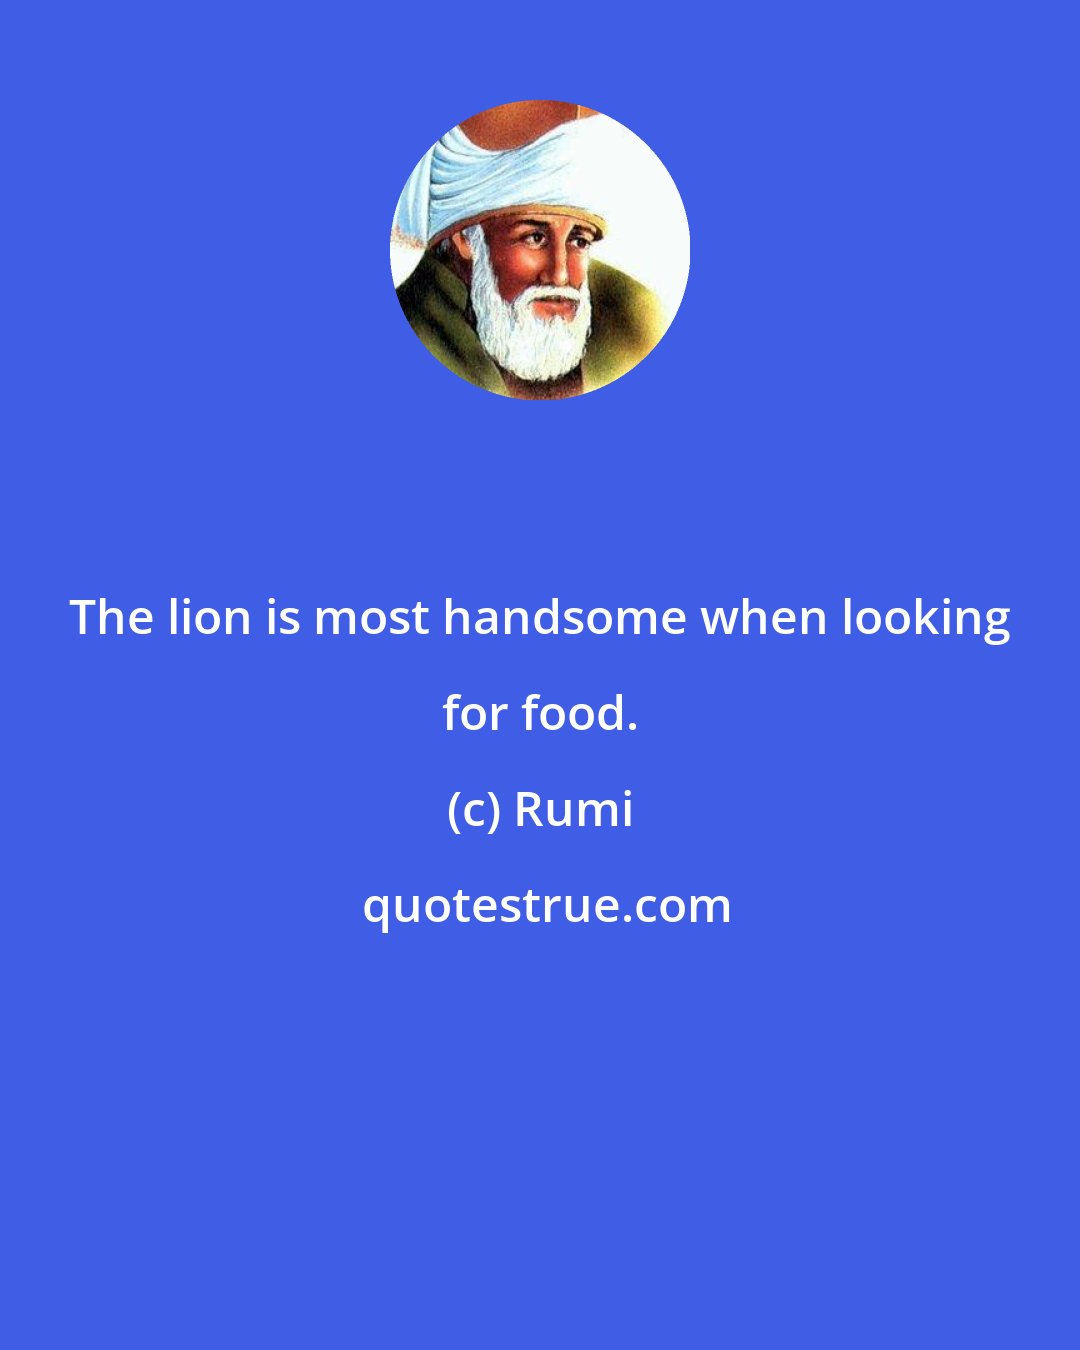 Rumi: The lion is most handsome when looking for food.